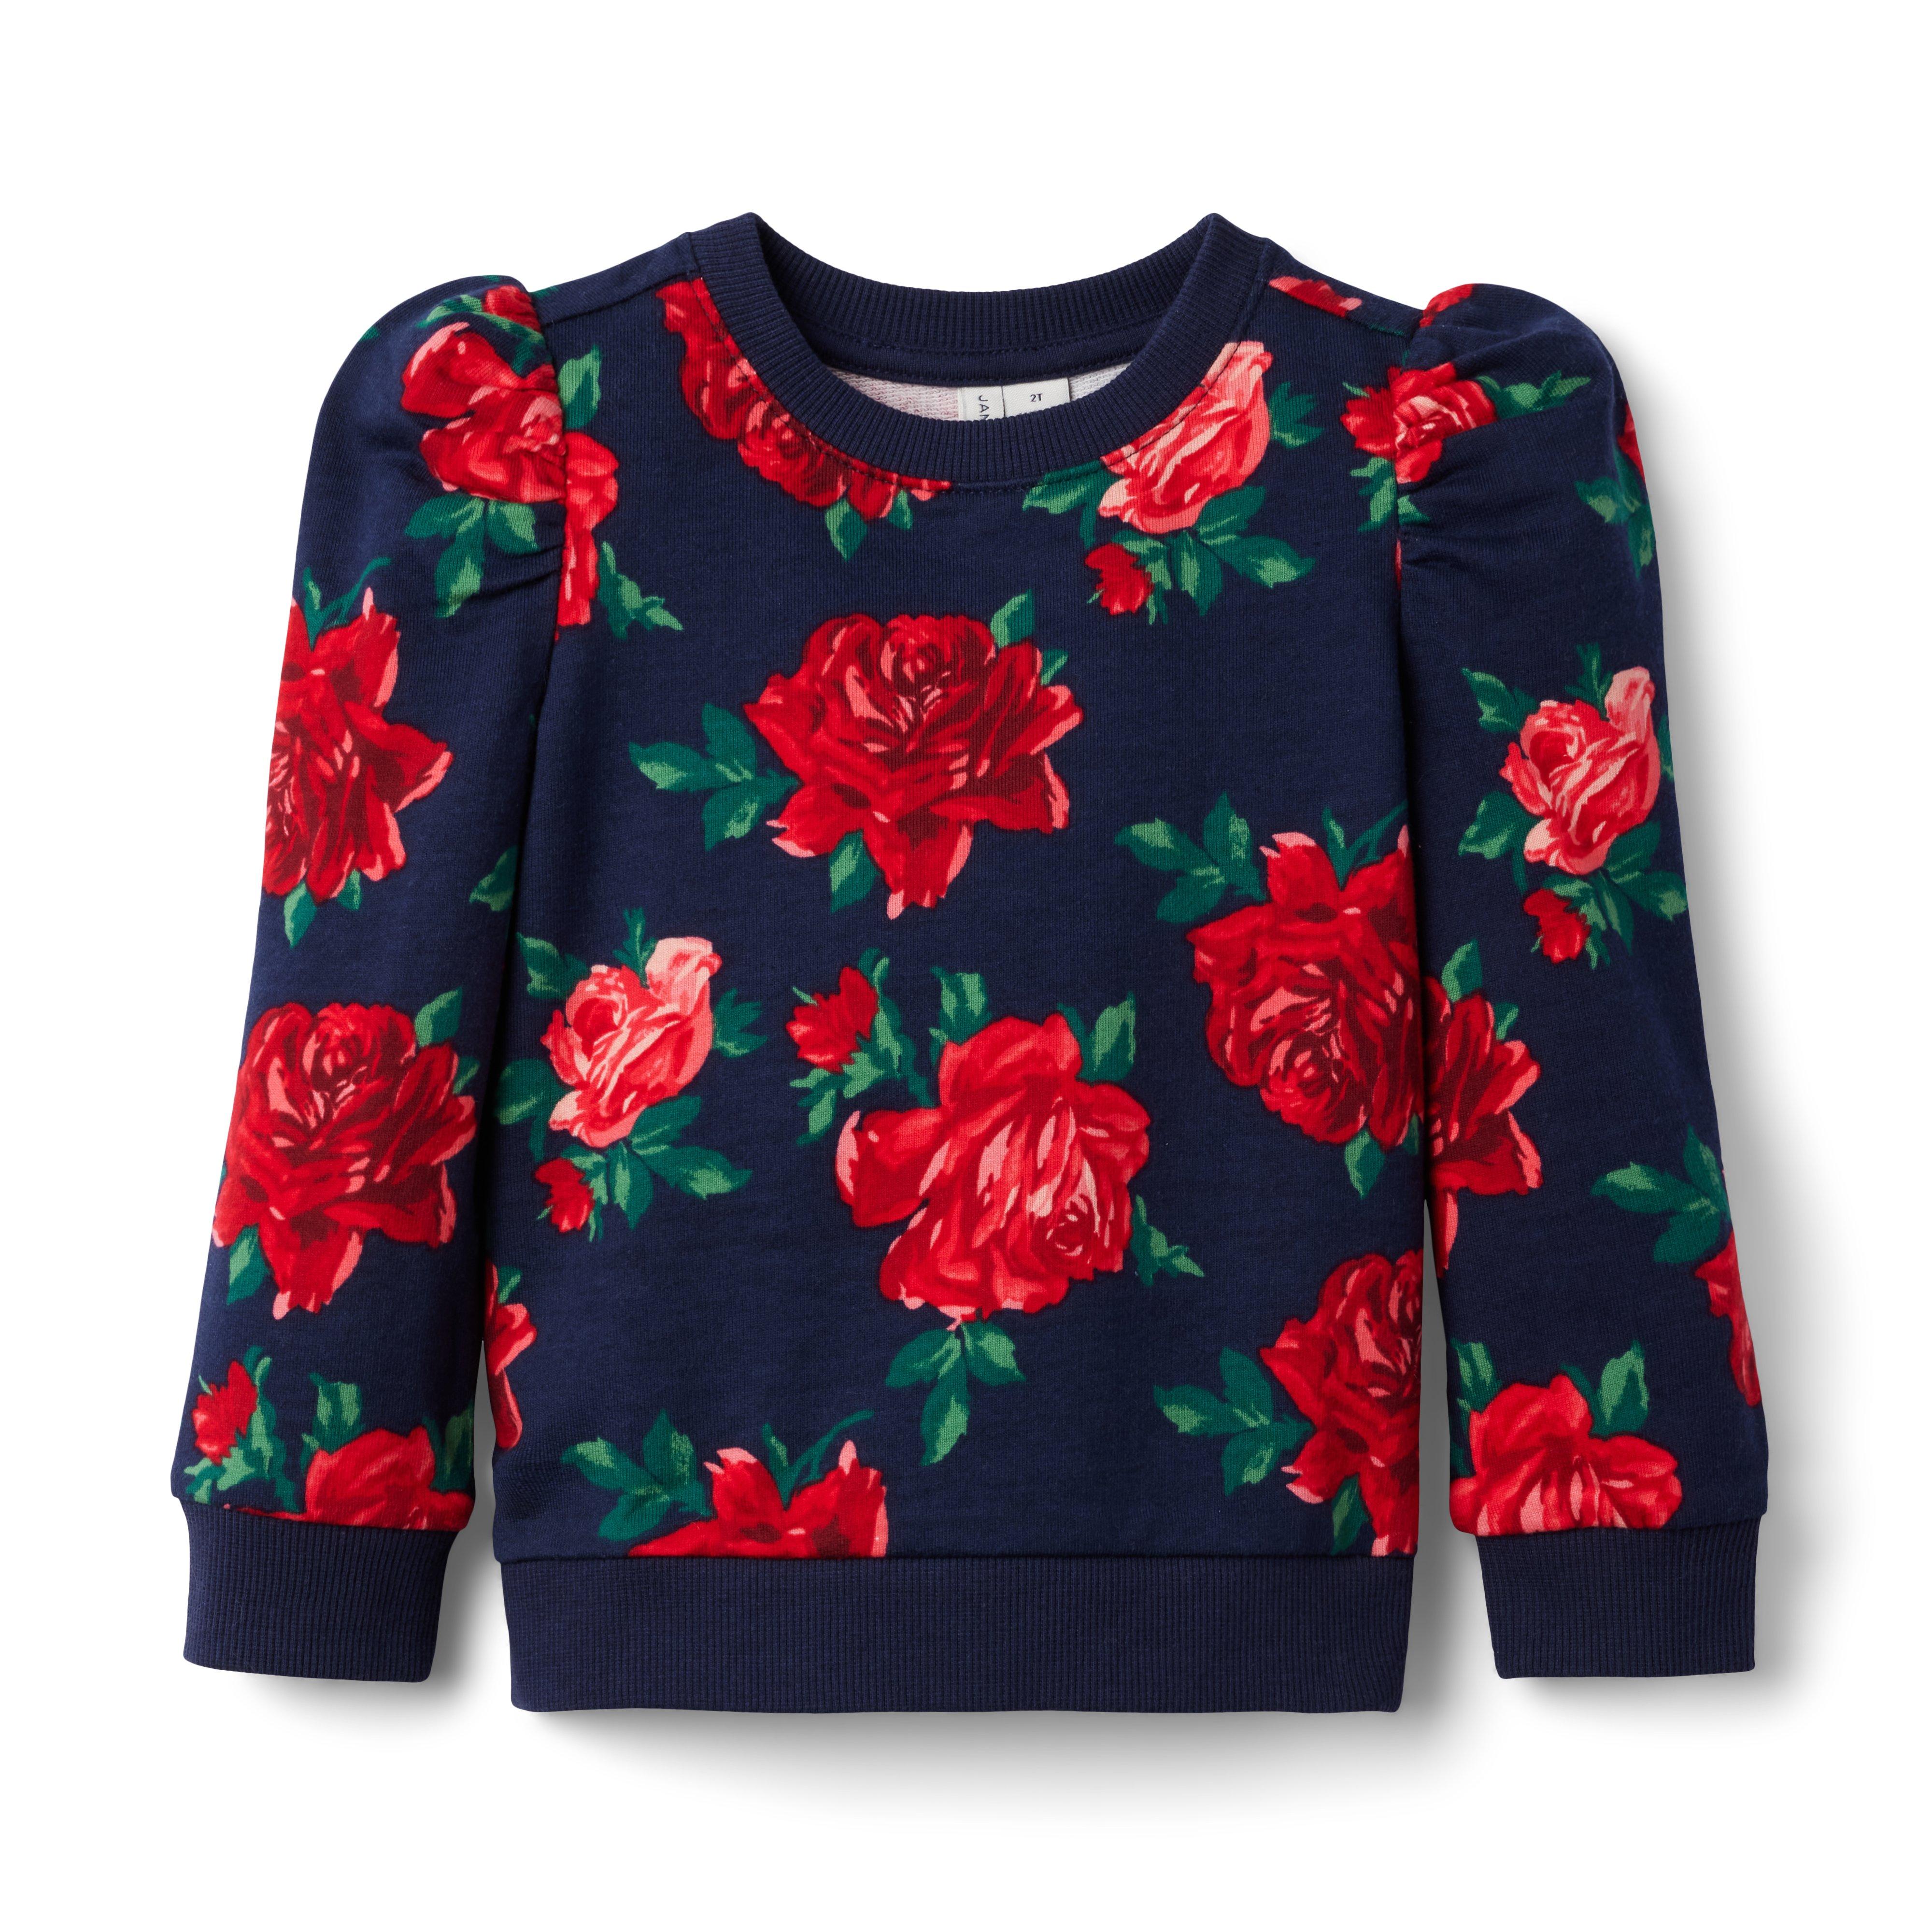 American Girl® x Janie and Jack Wrapped In Roses Party Top image number 0